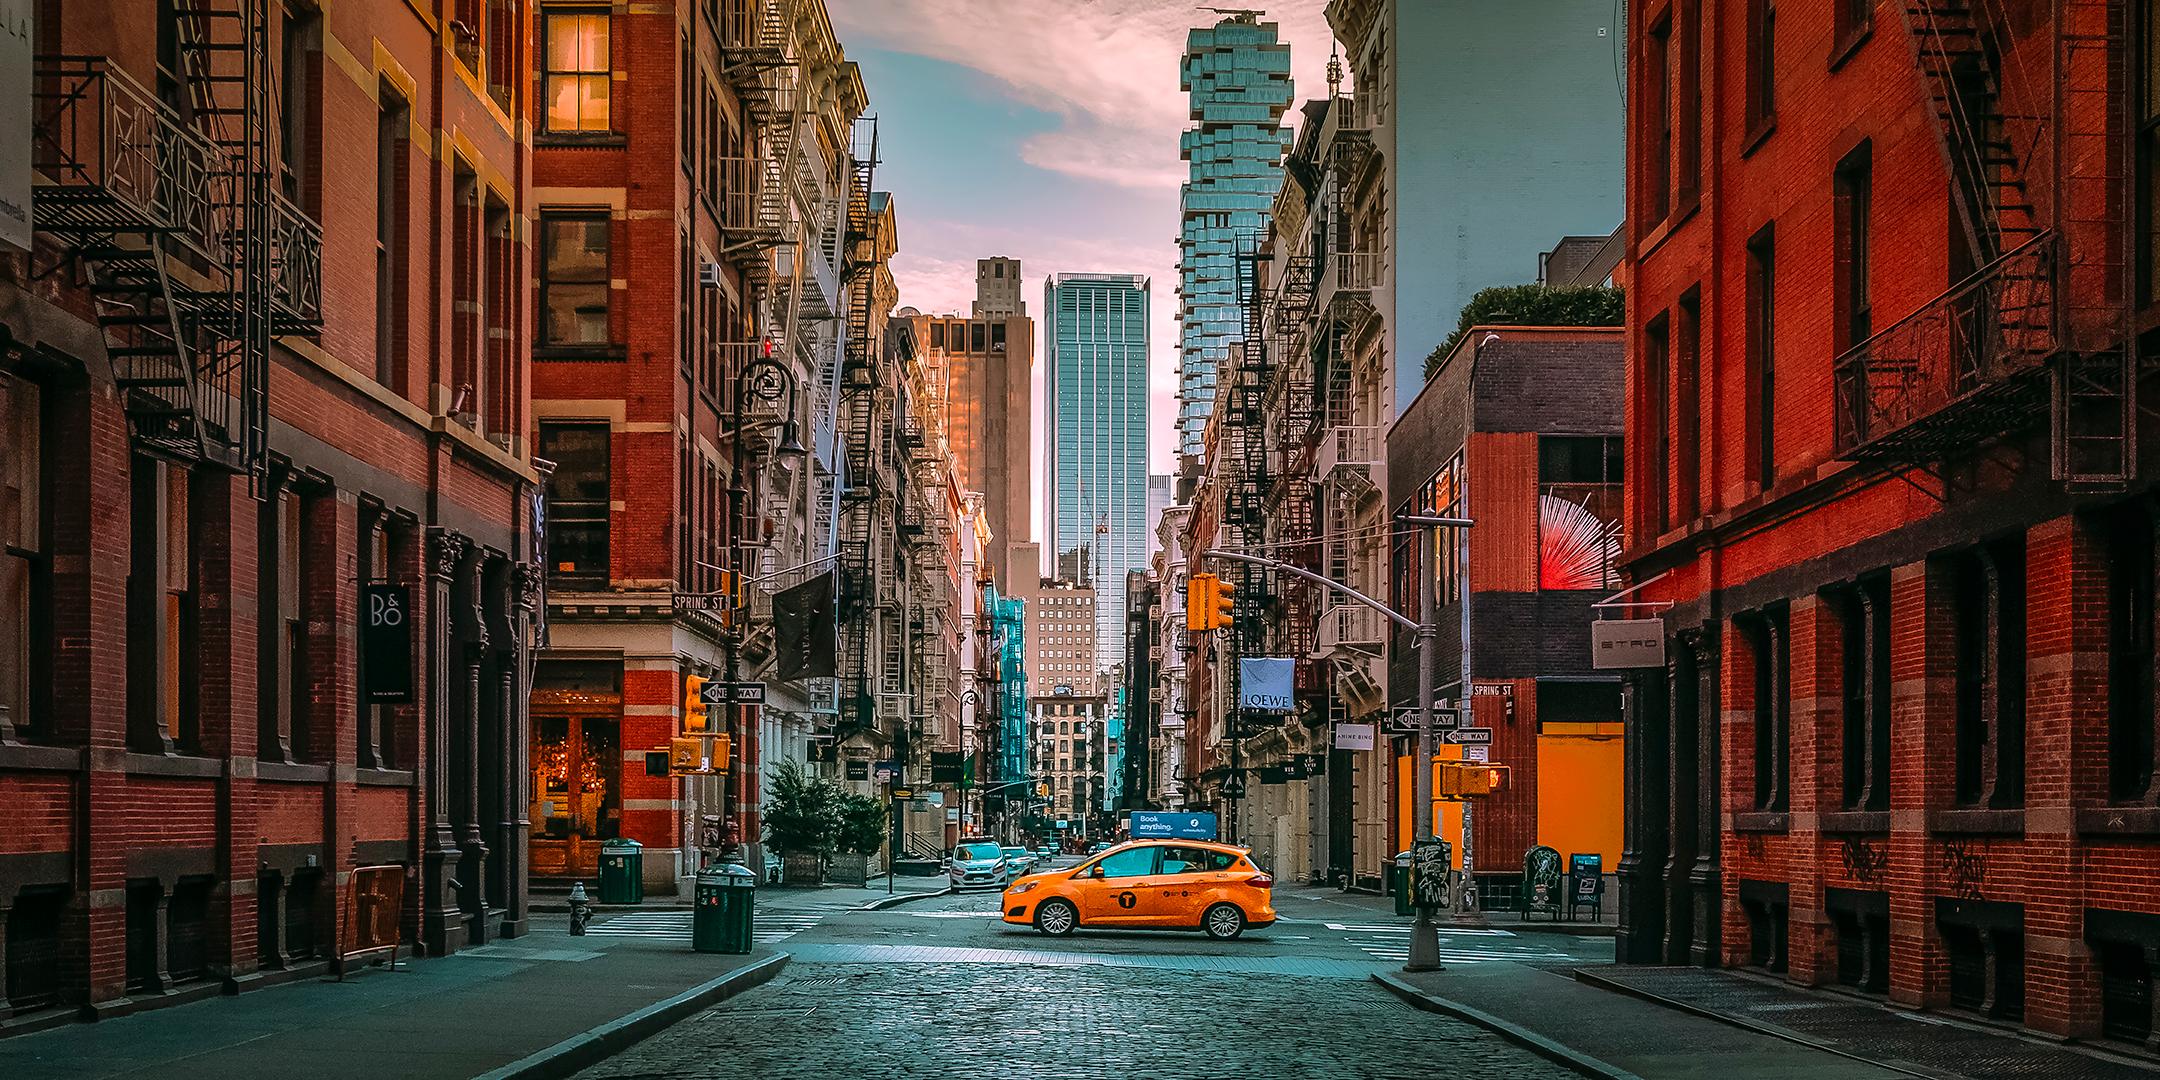 SoHo Cab - NYC Photography, 30"x58", Signed Limited Edition of 5